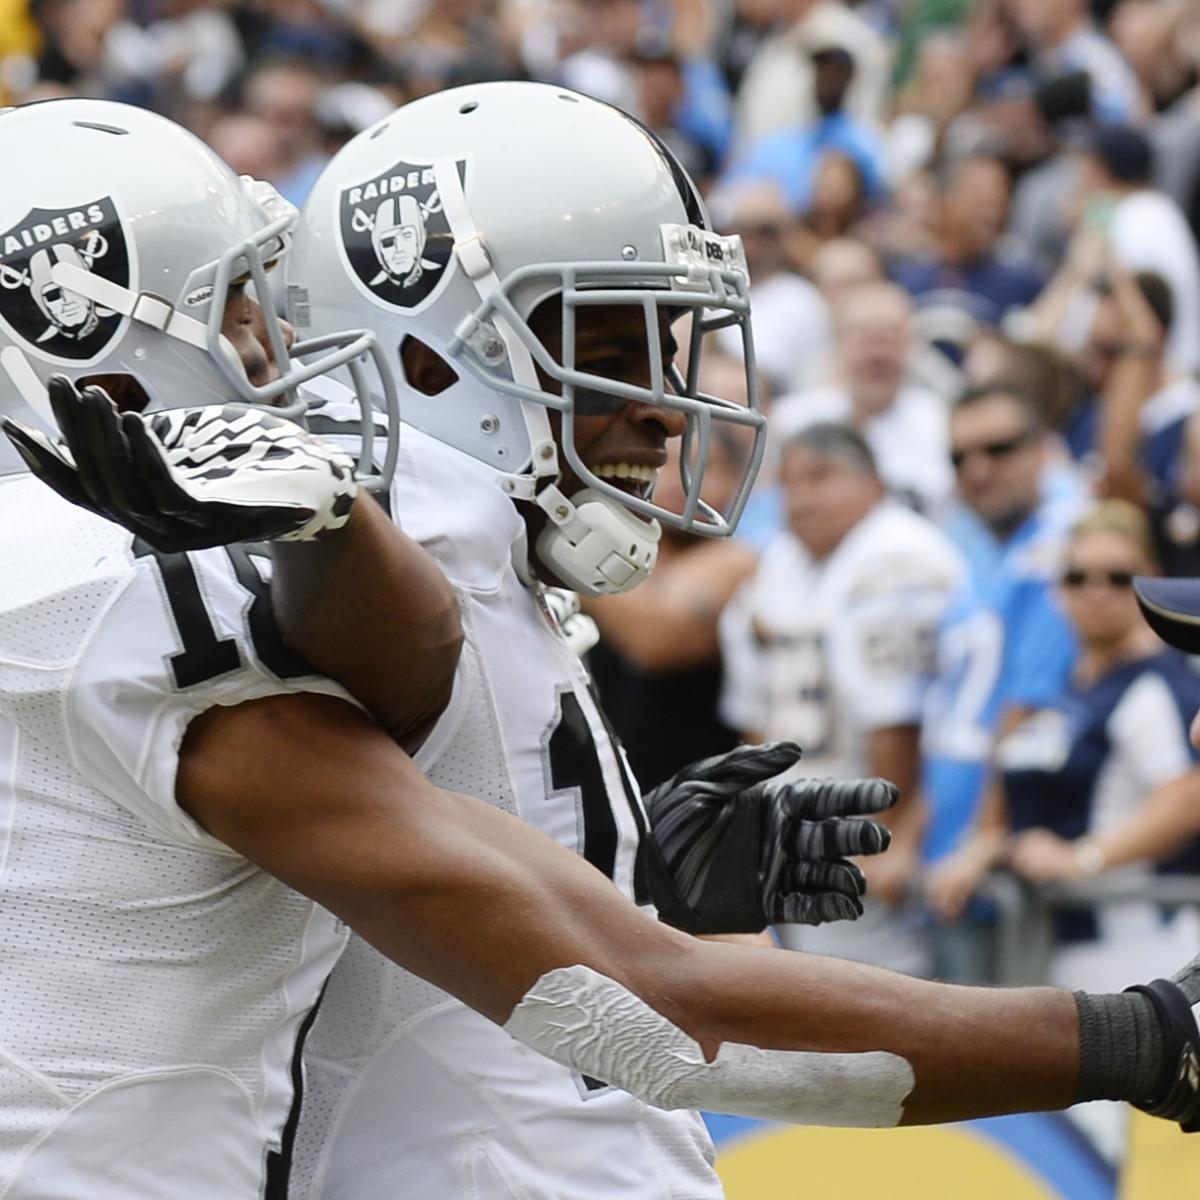 Raiders beat Chargers, head to playoffs for first time since 2002